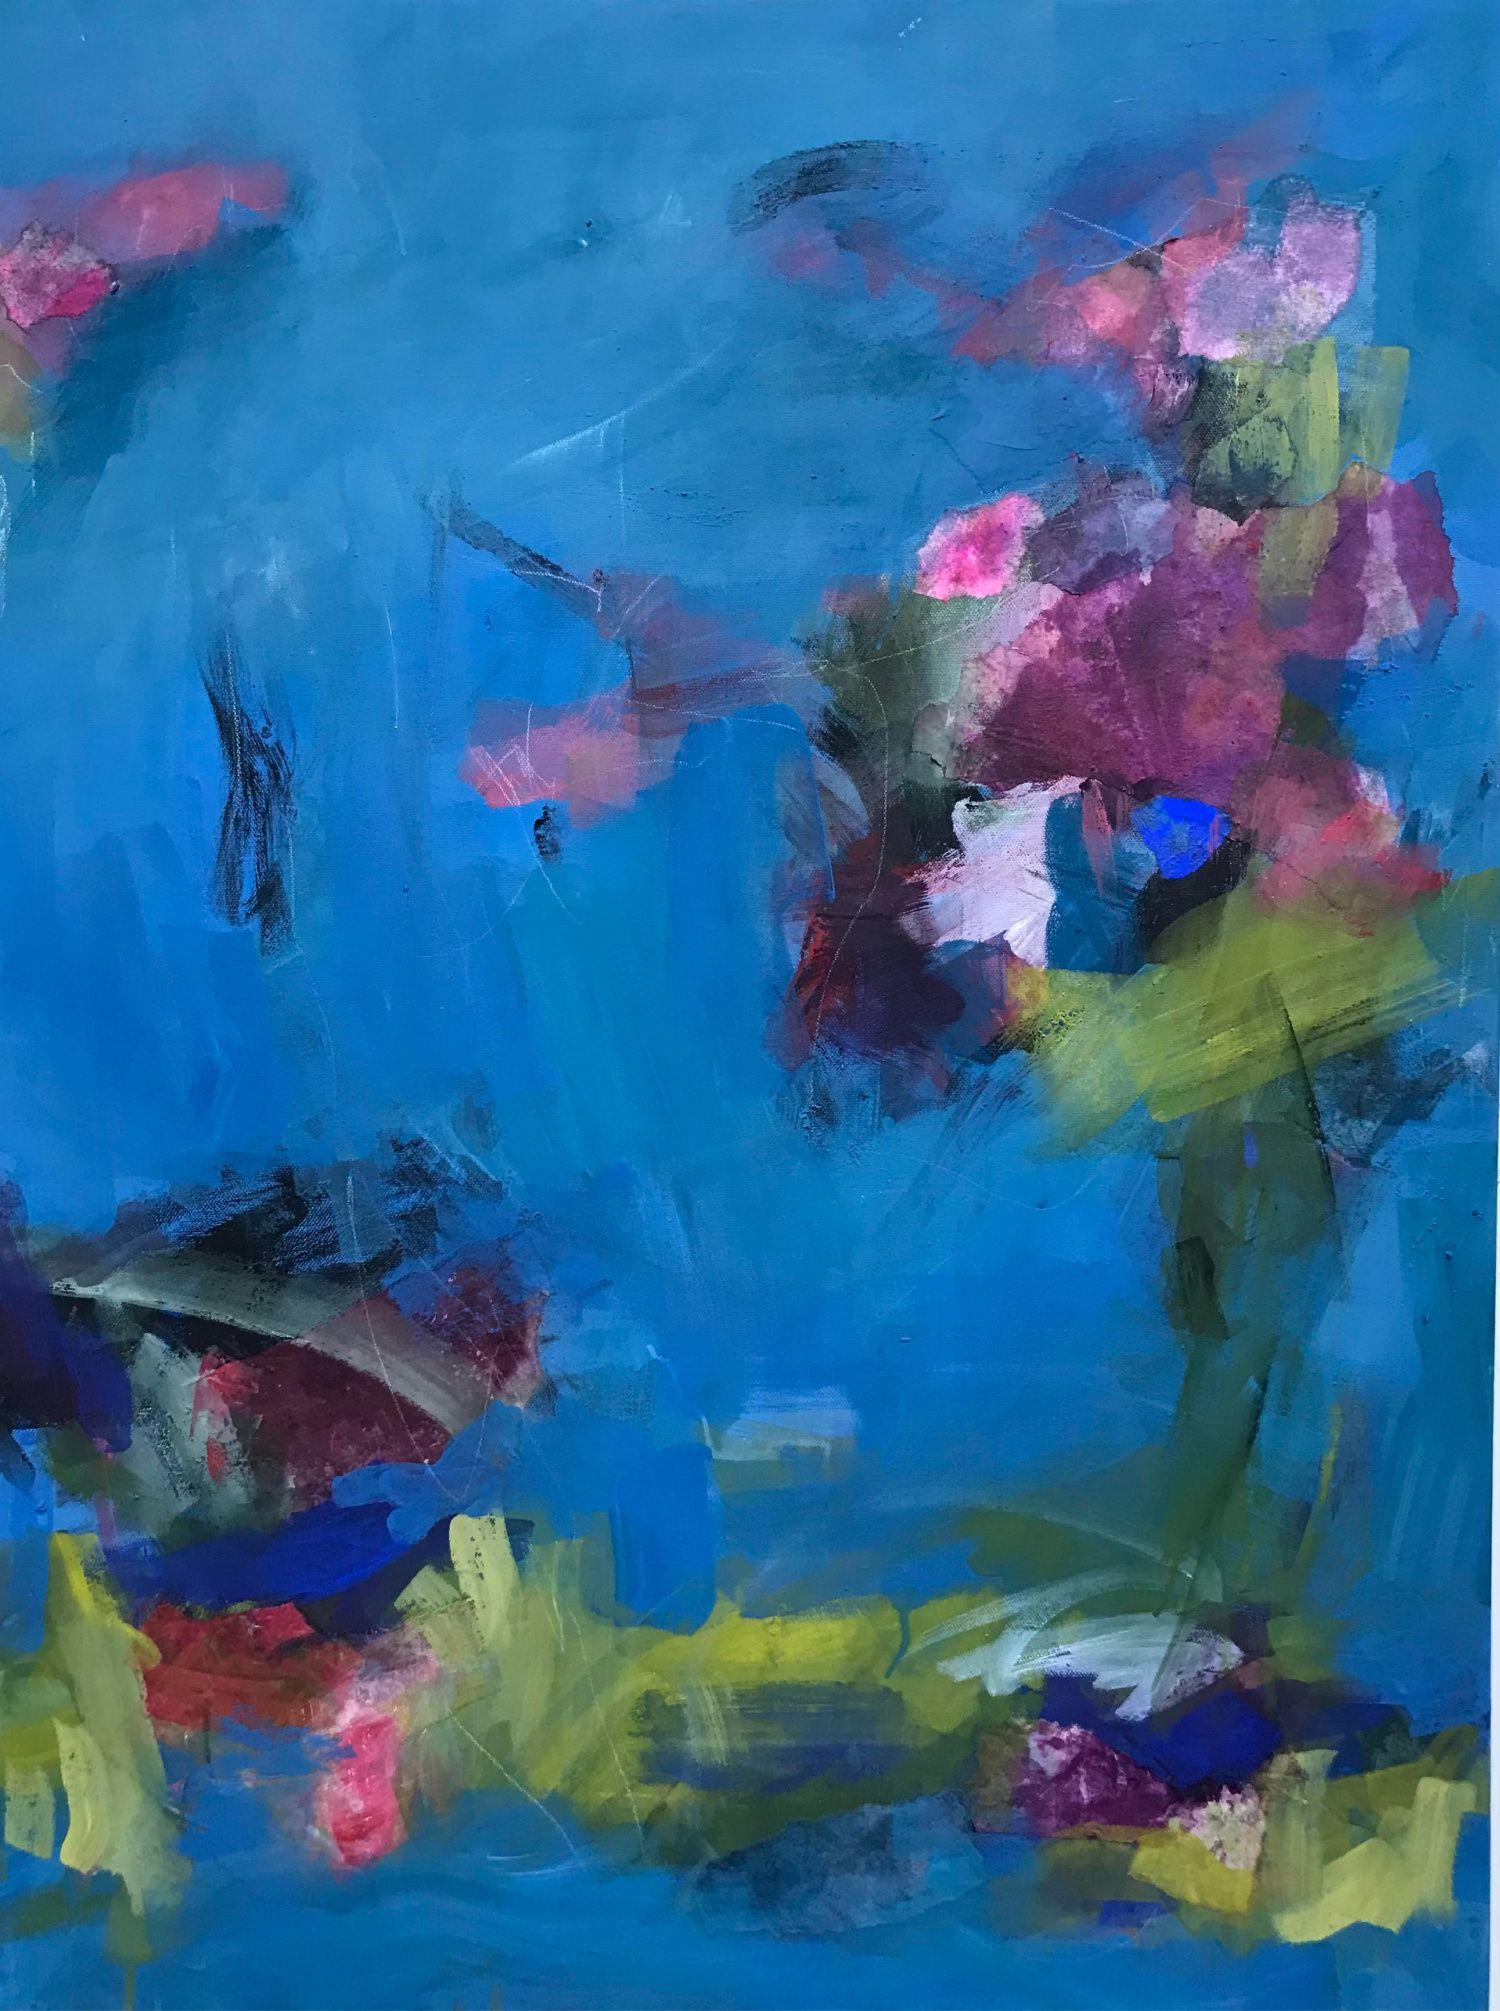 Abstract Painting Angela Dierks - « Going with the Flow », peinture à l'acrylique sur toile